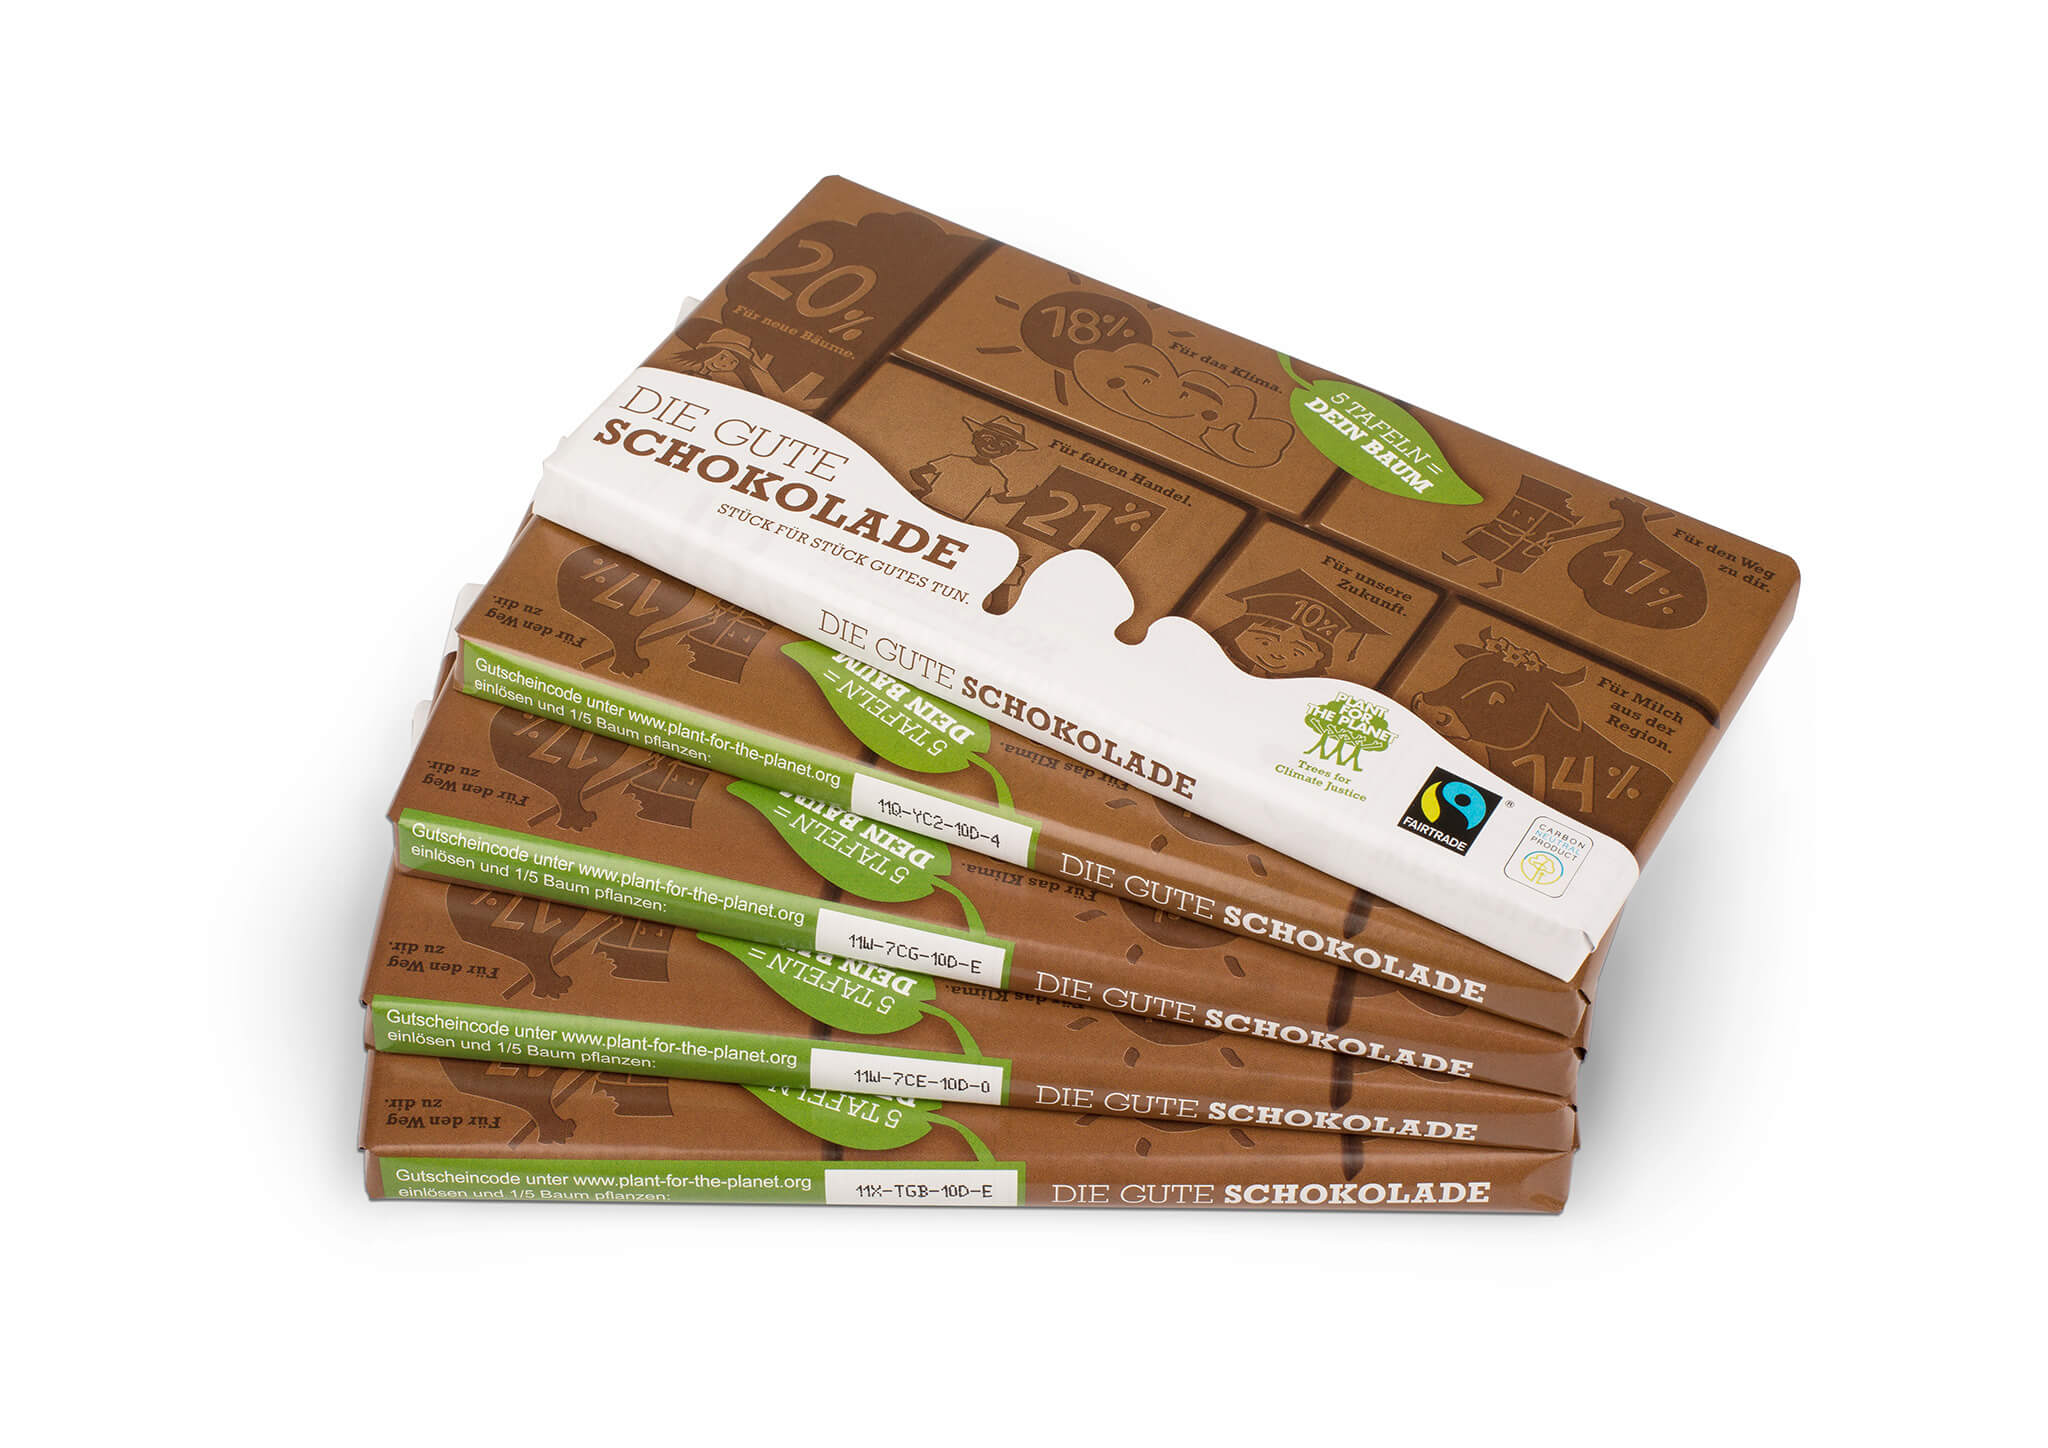 5 bars of The Change Chocolate to plant one tree